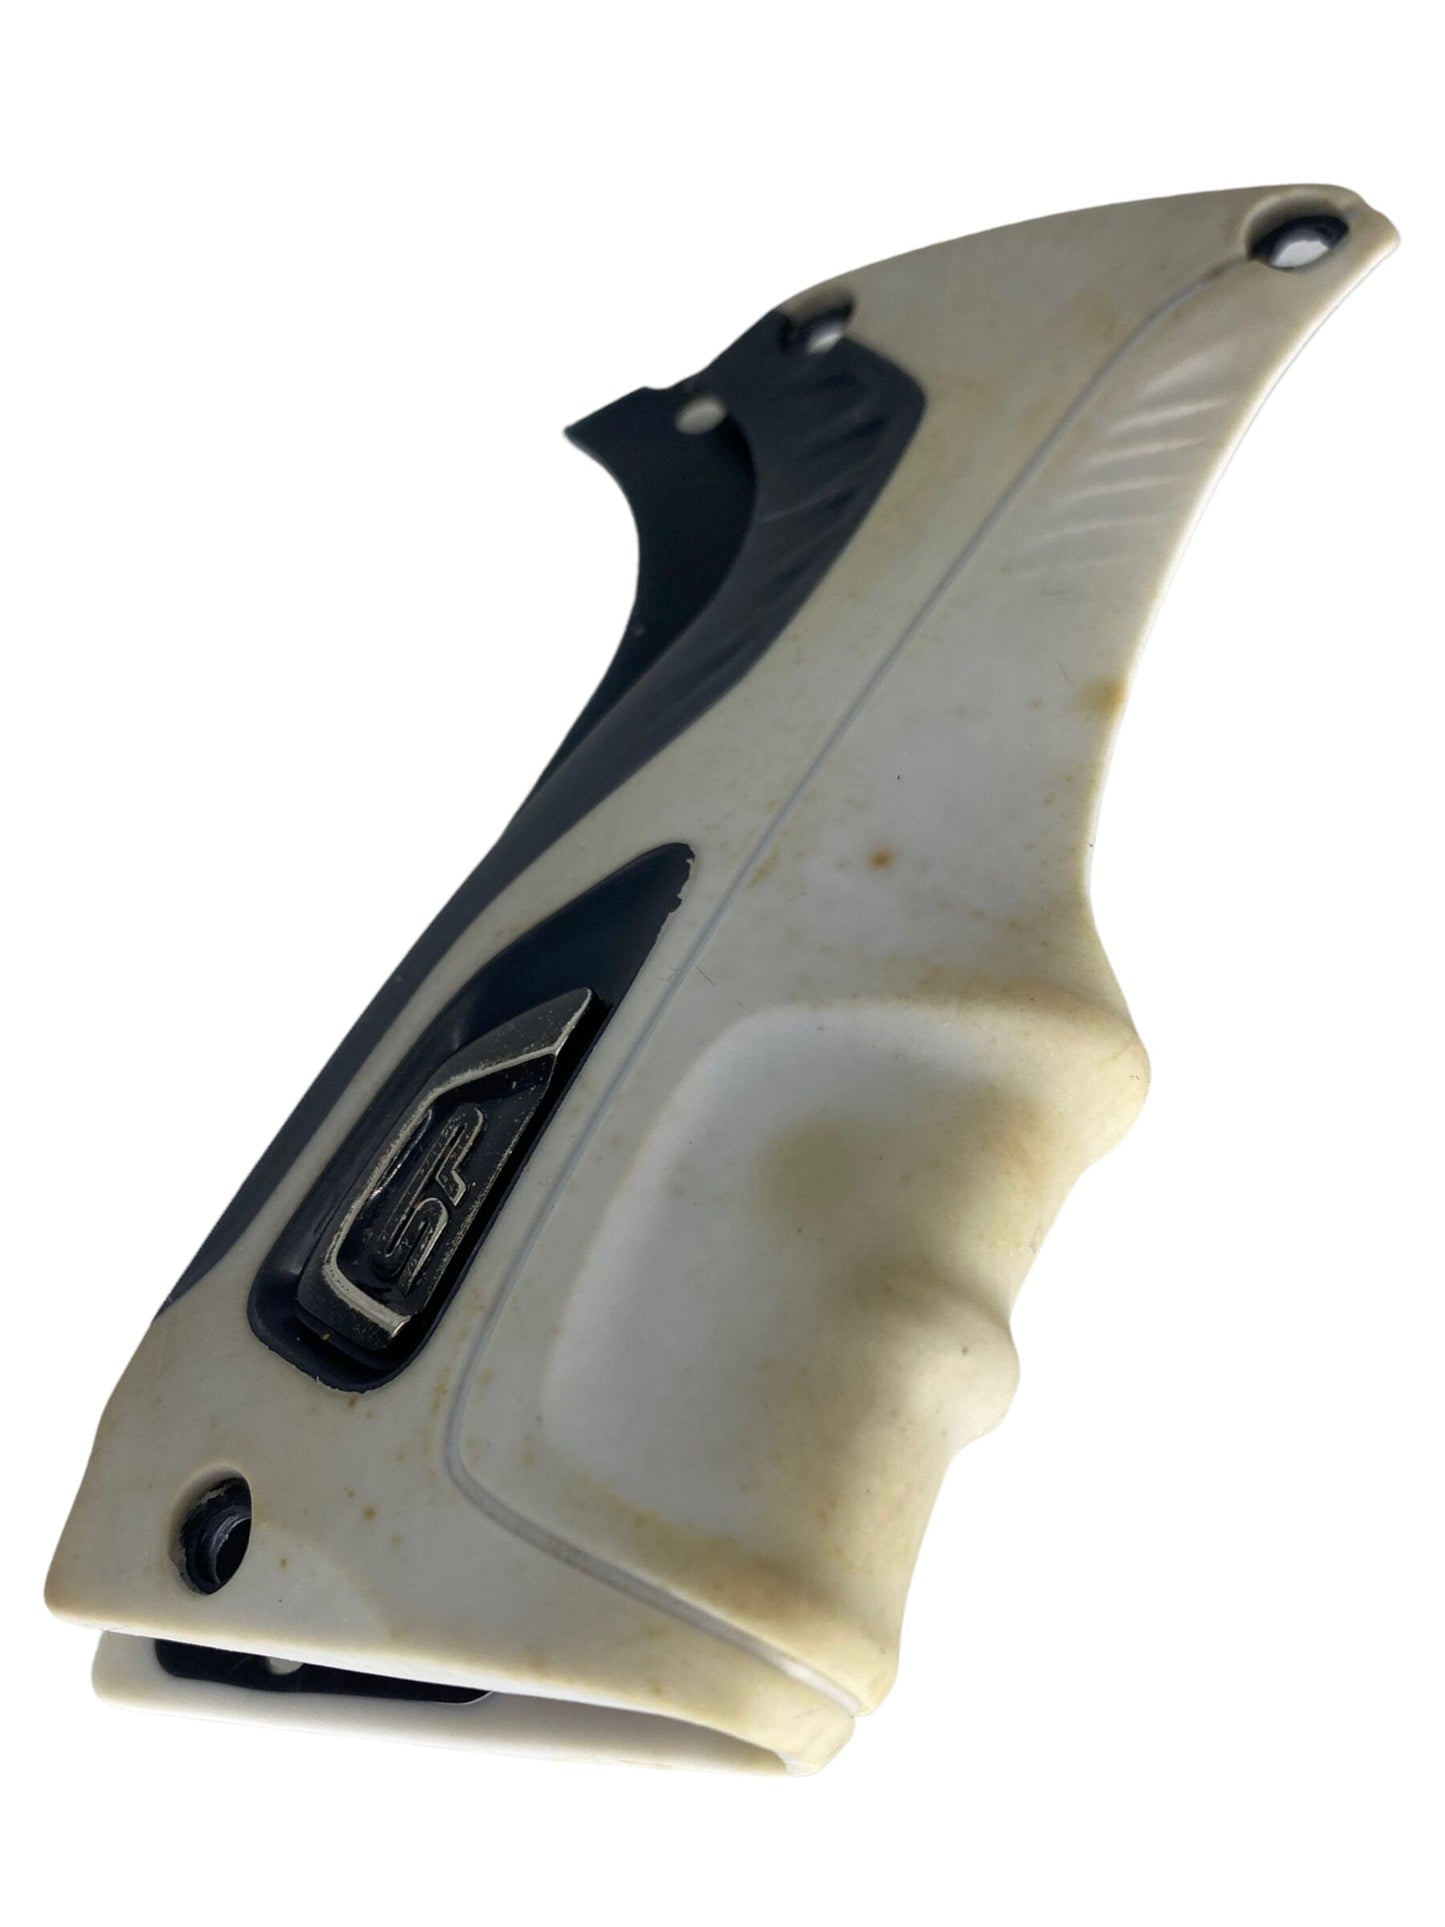 Used Shocker Rsx/Xls White Grips Paintball Gun from CPXBrosPaintball Buy/Sell/Trade Paintball Markers, Paintball Hoppers, Paintball Masks, and Hormesis Headbands